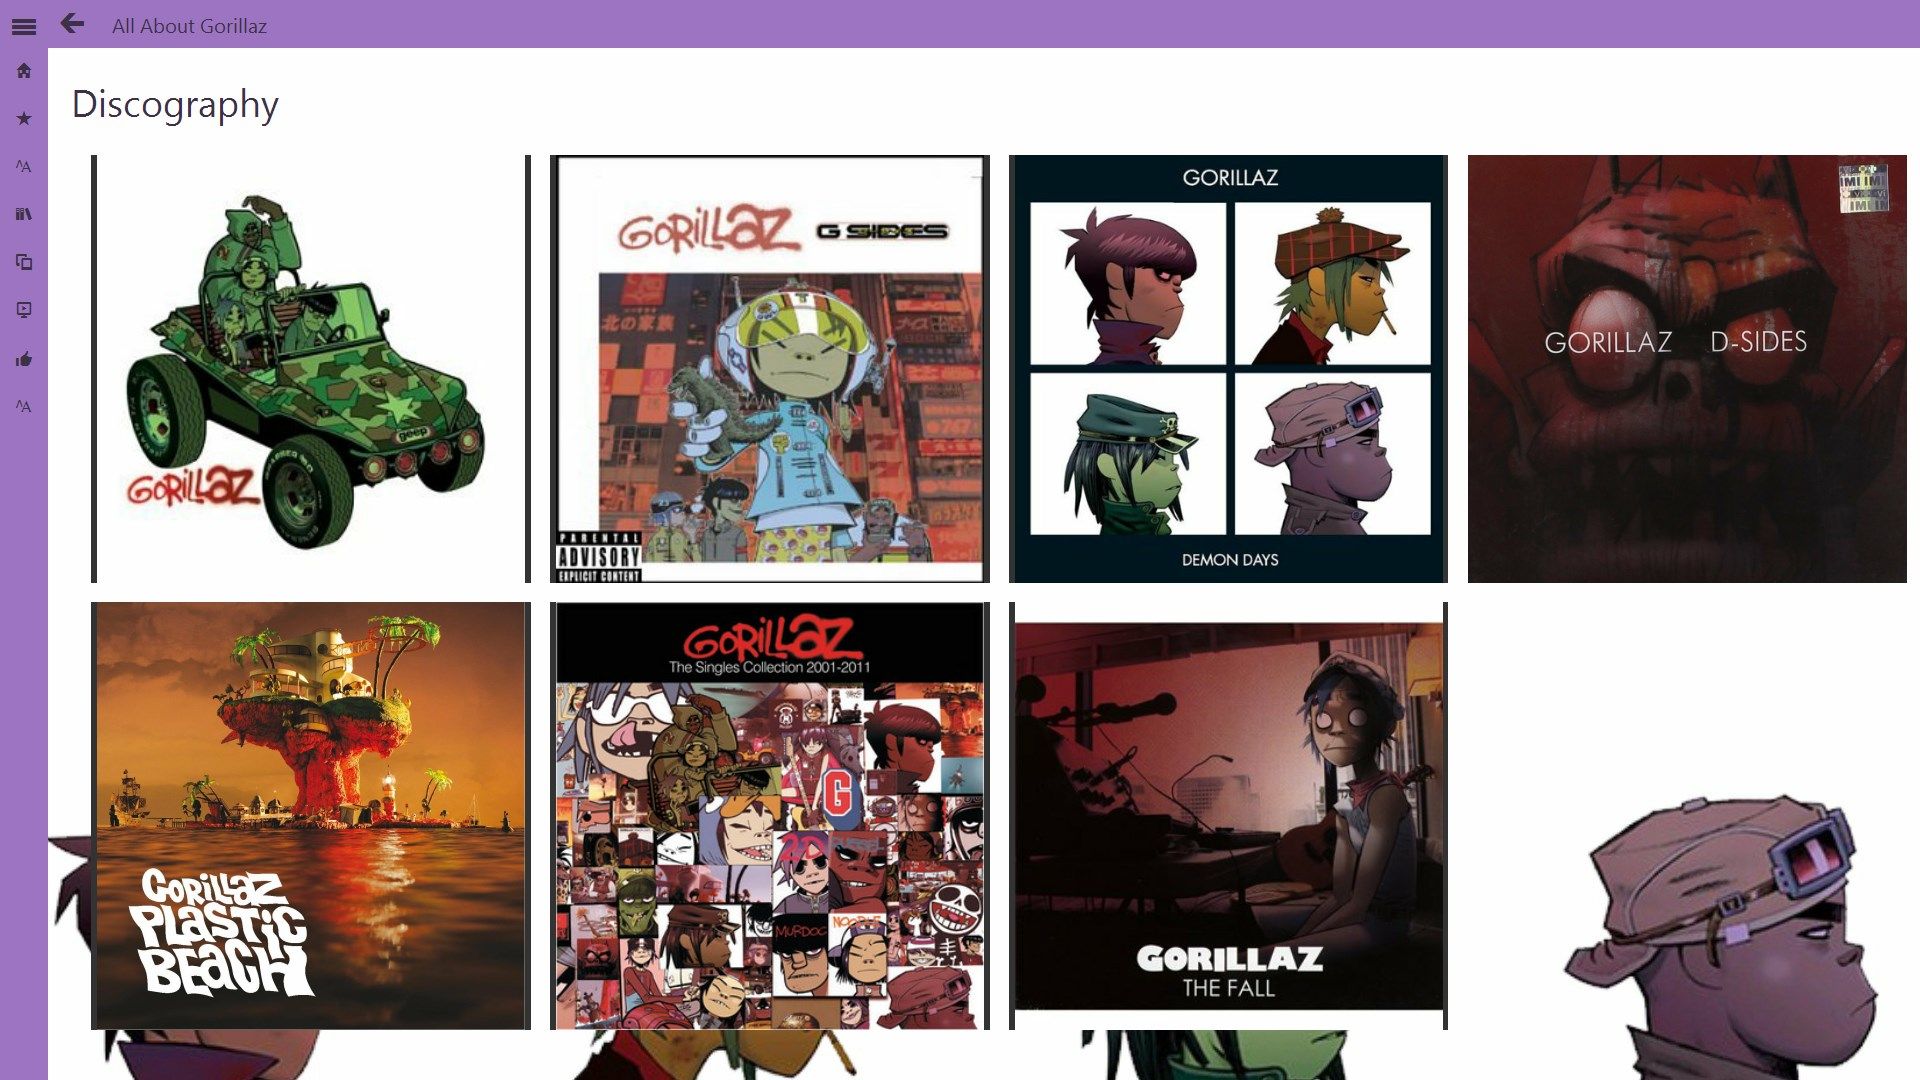 All About Gorillaz